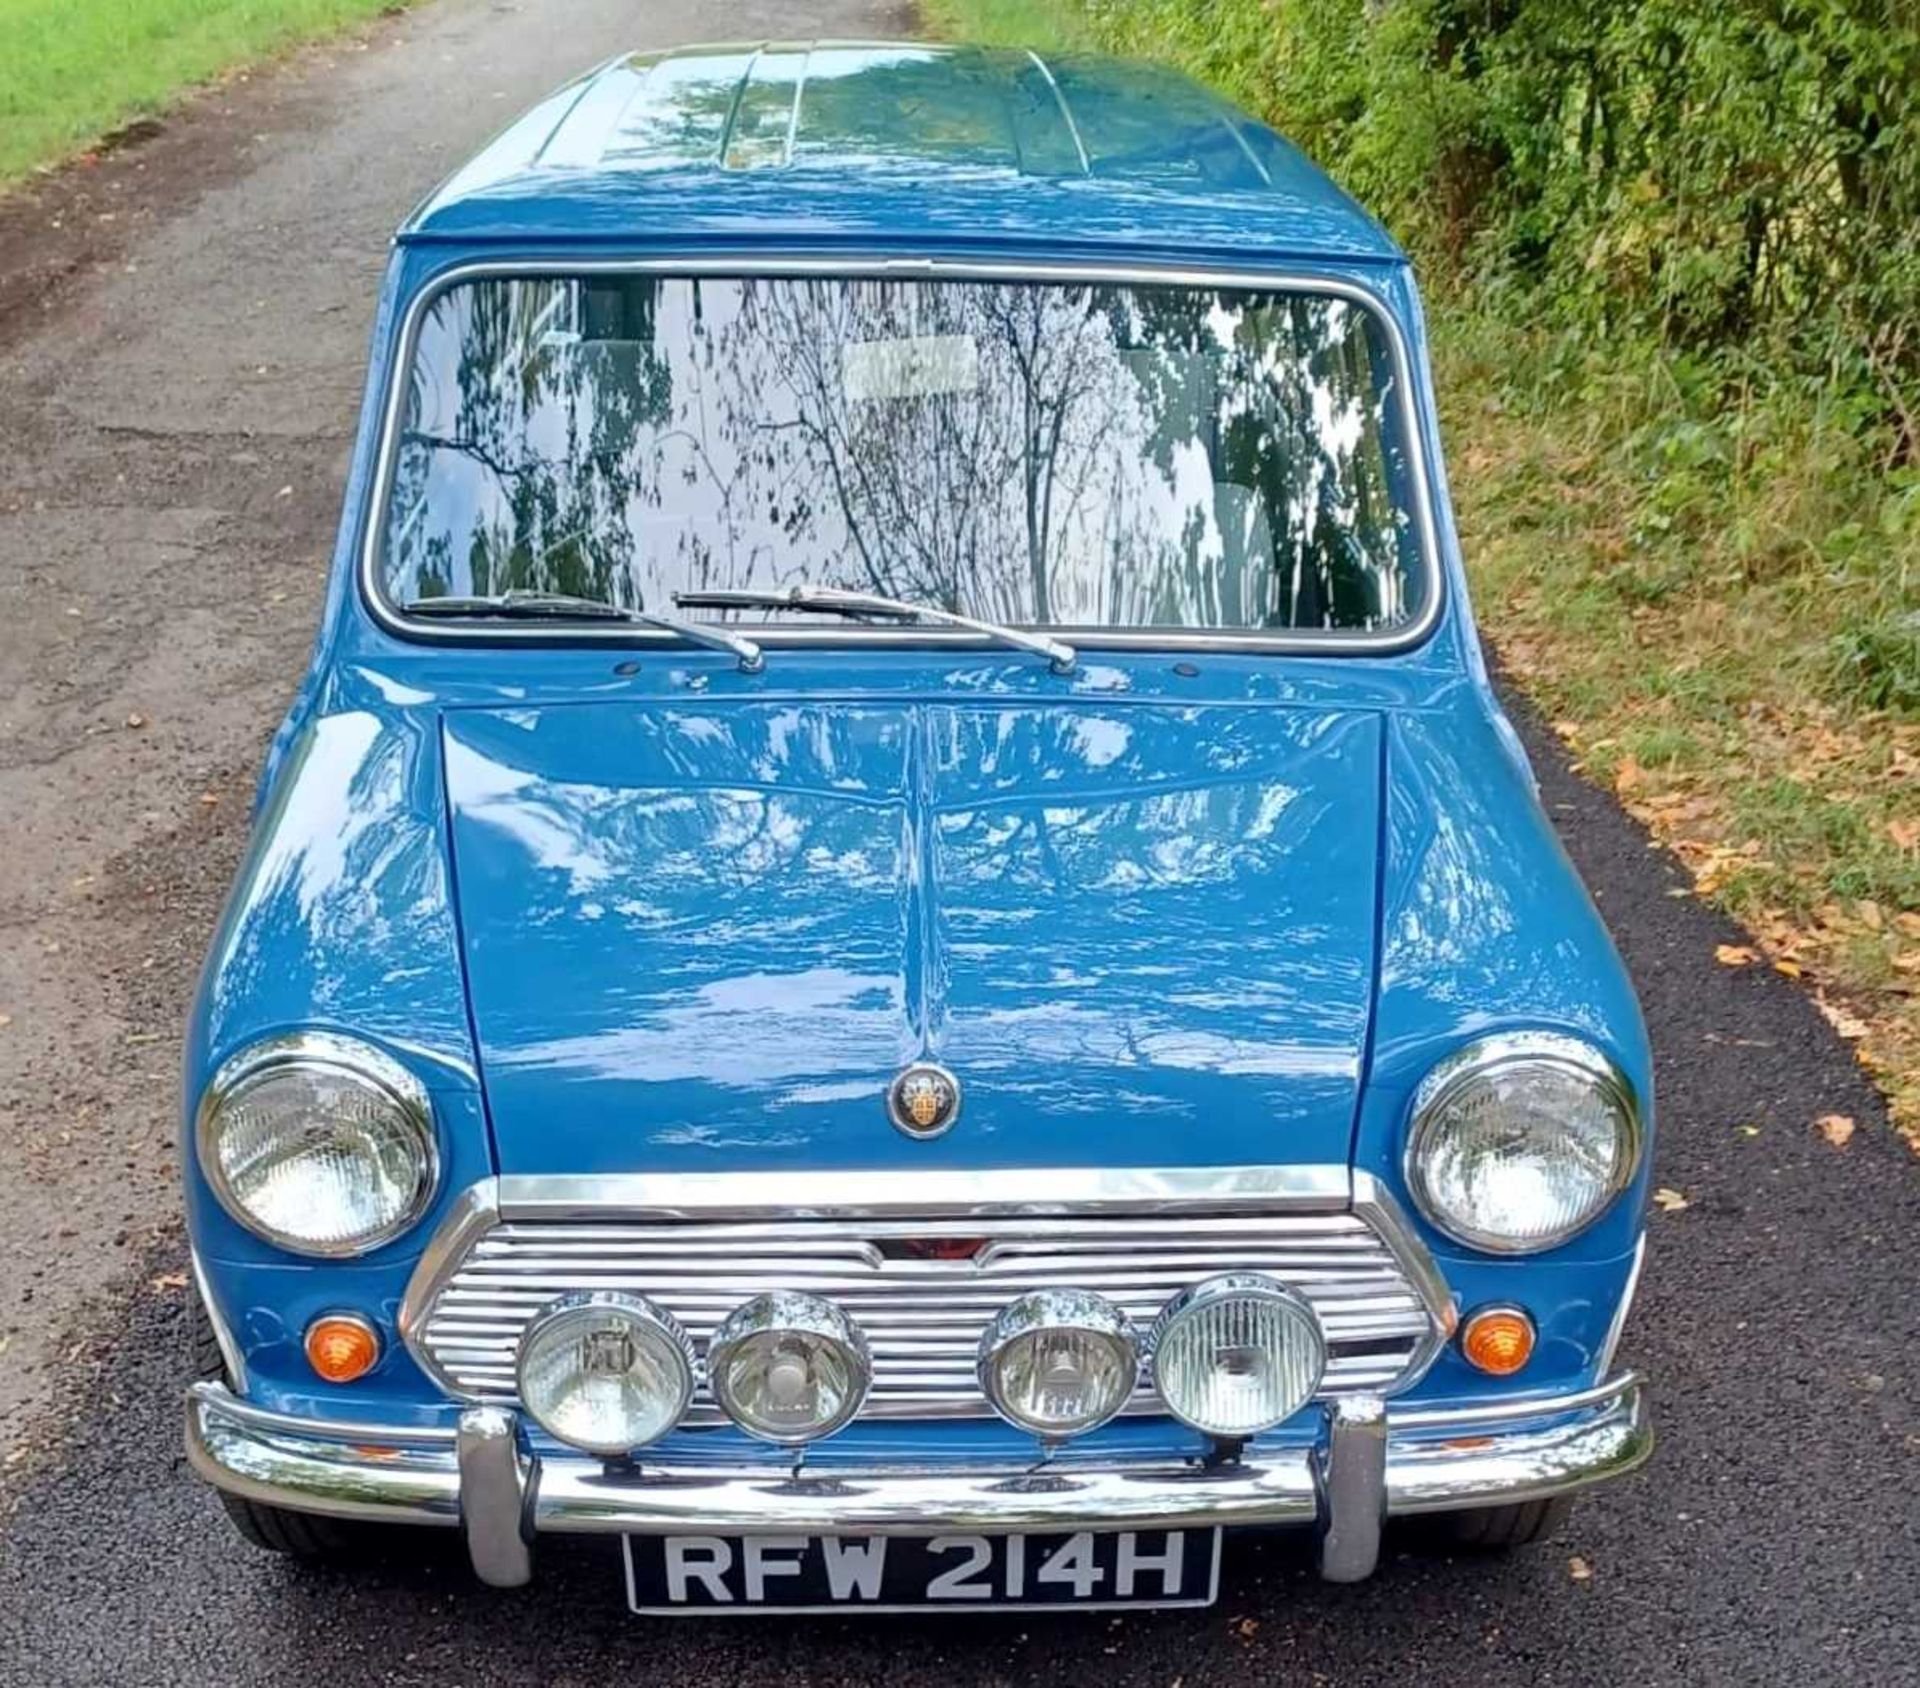 1970 Austin Mini Countryman Fully restored to concourse standard - Image 13 of 43